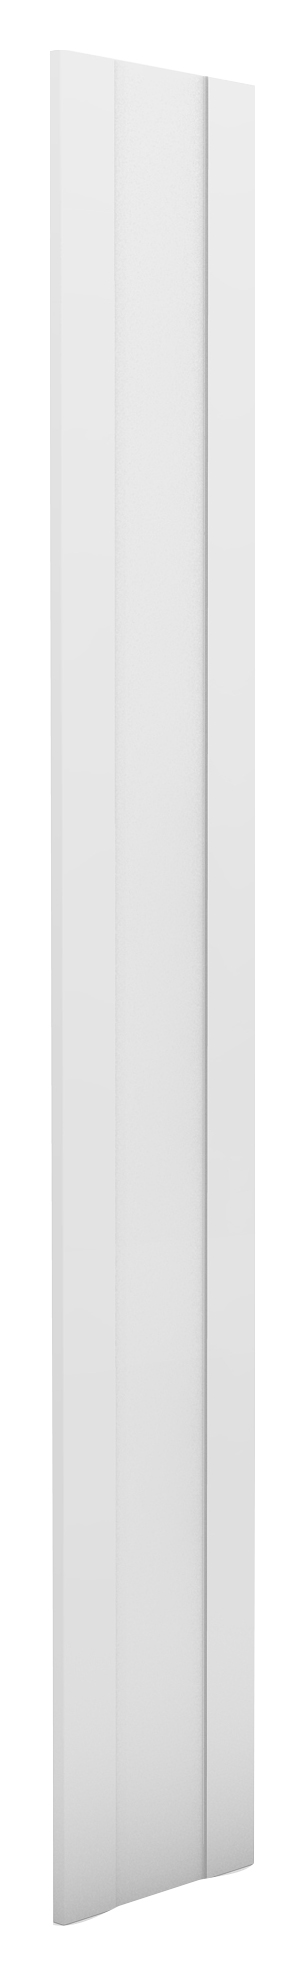 Image of Duarti By Calypso Matt White Highwood High Rise End / Infill Panel - 305 x 2035 x 18mm